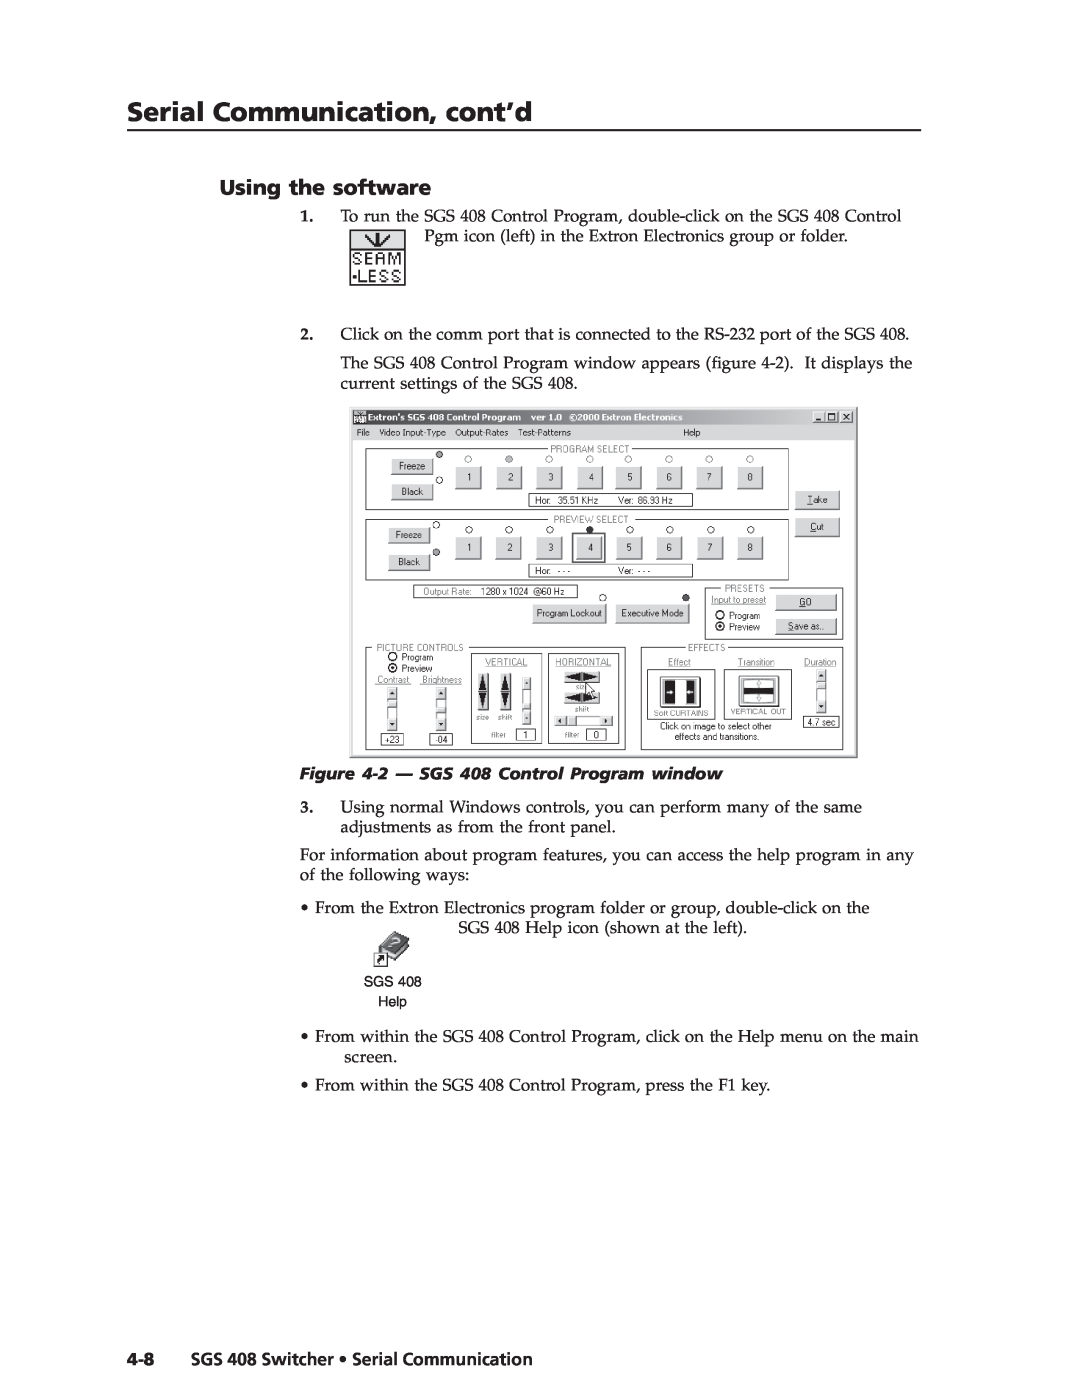 Extron electronic manual Using the software, 2 - SGS 408 Control Program window, SGS 408 Switcher Serial Communication 